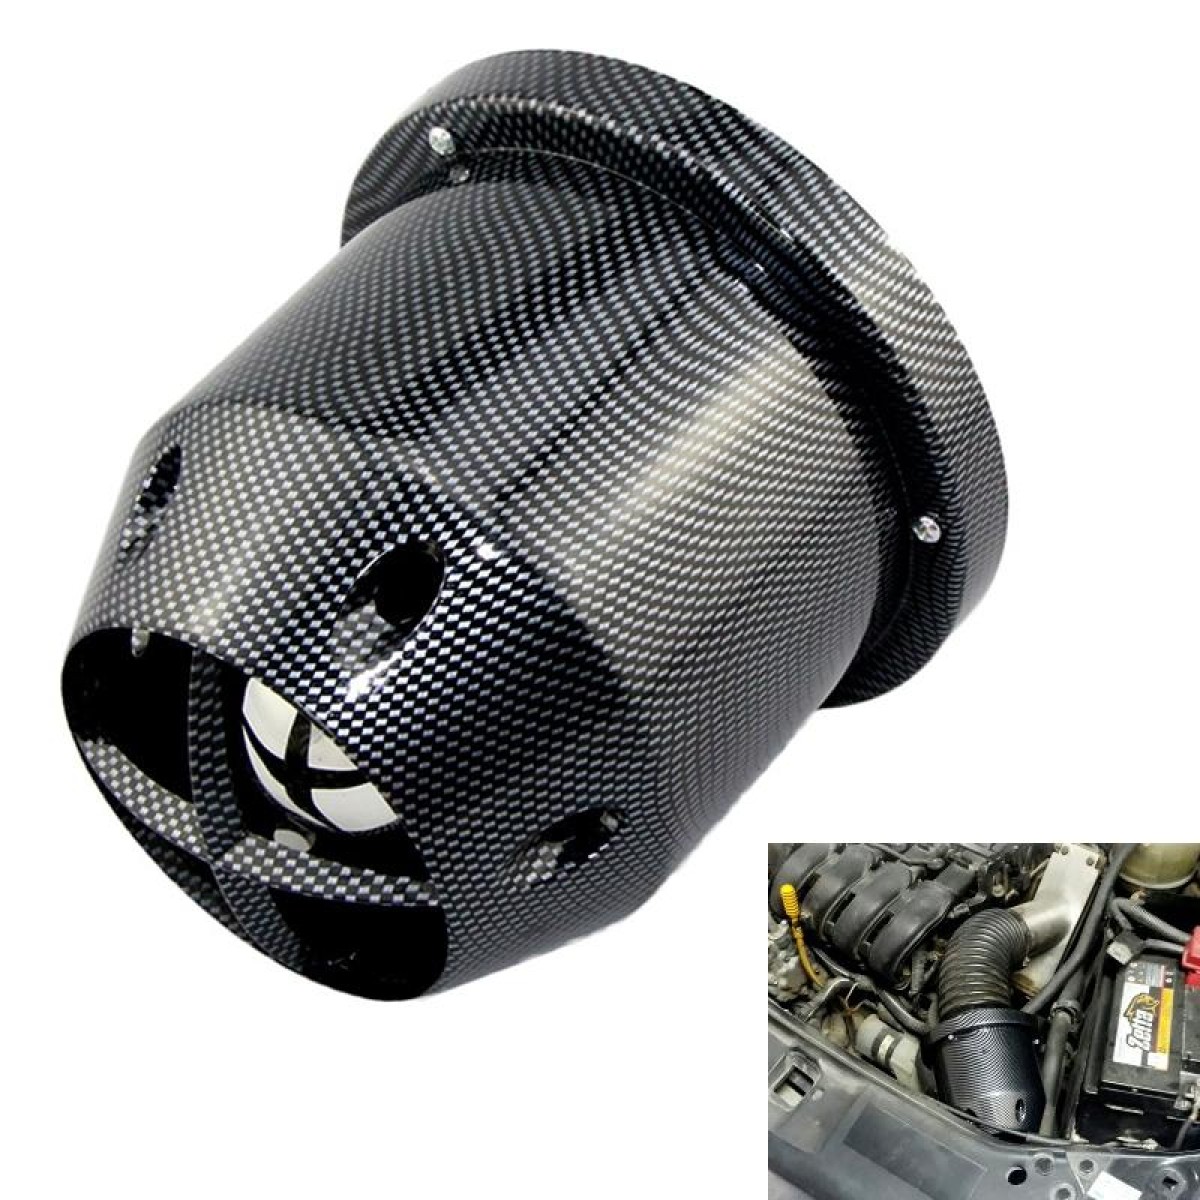 XH-UN005 Car Universal Modified High Flow Mushroom Head Style Intake Filter for 76mm Air Filter (Carbon Fiber Black)